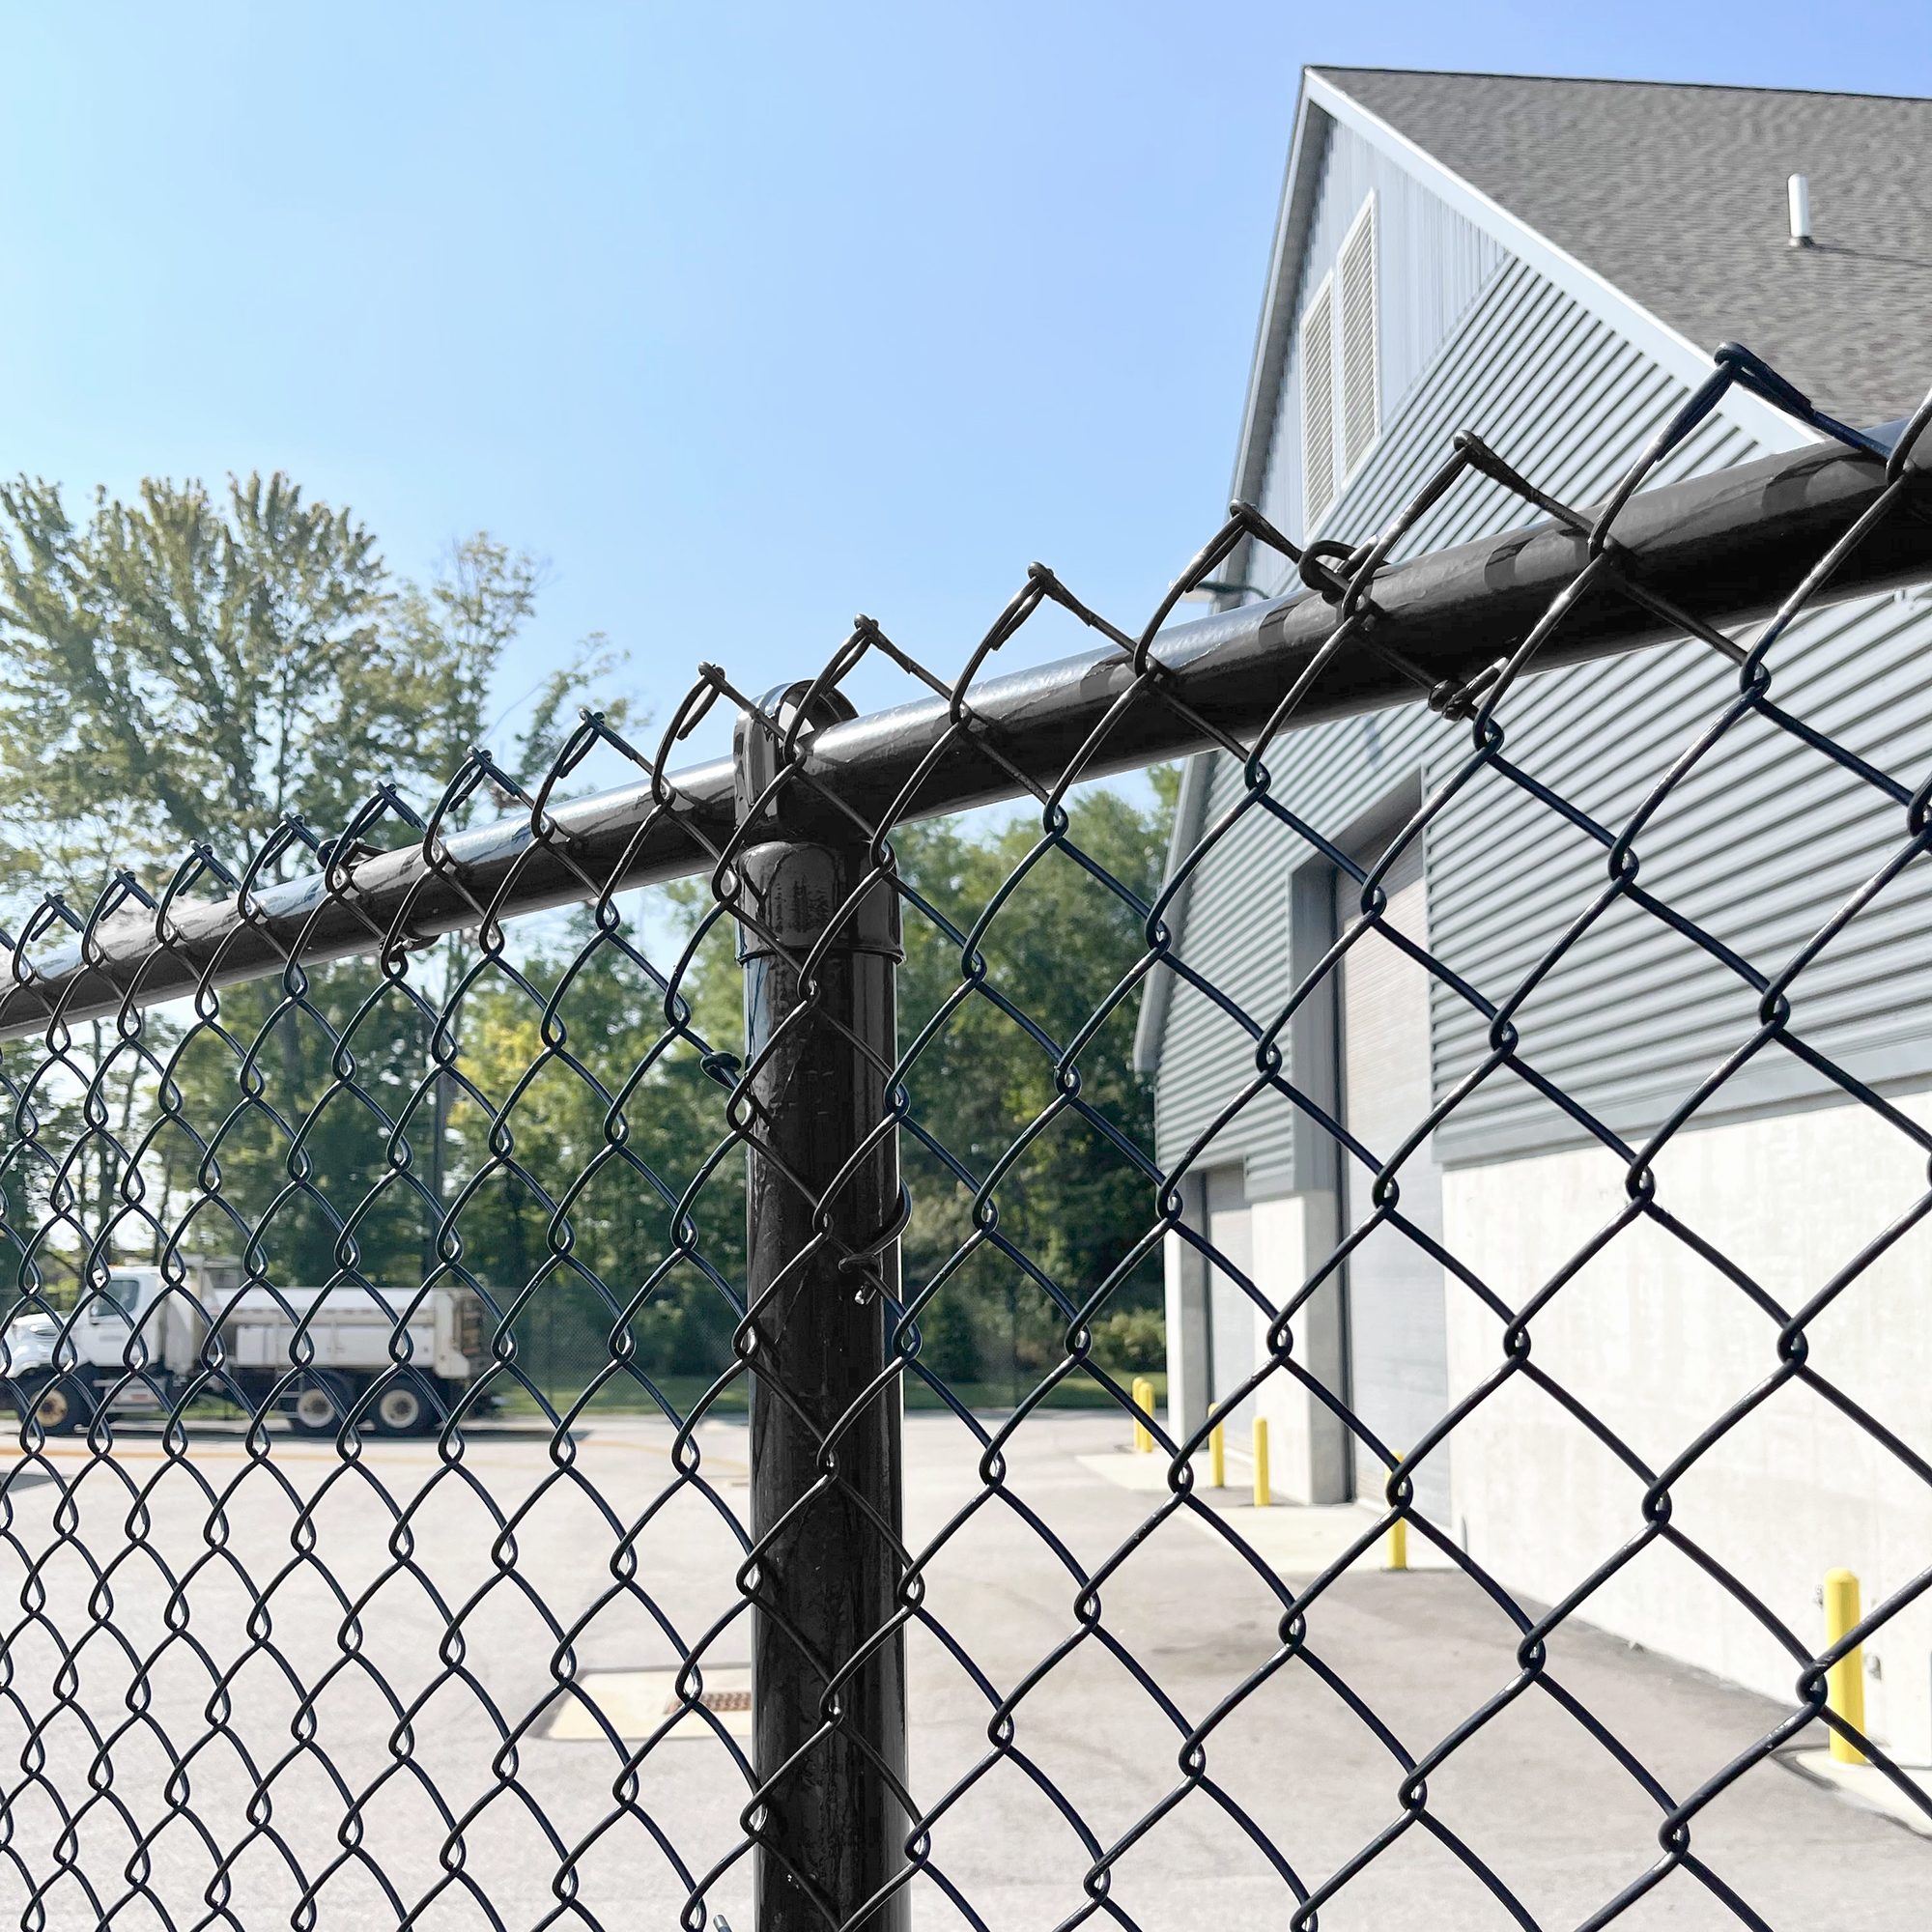 Black Chain Link Fence Up Close Installed With Black Mesh